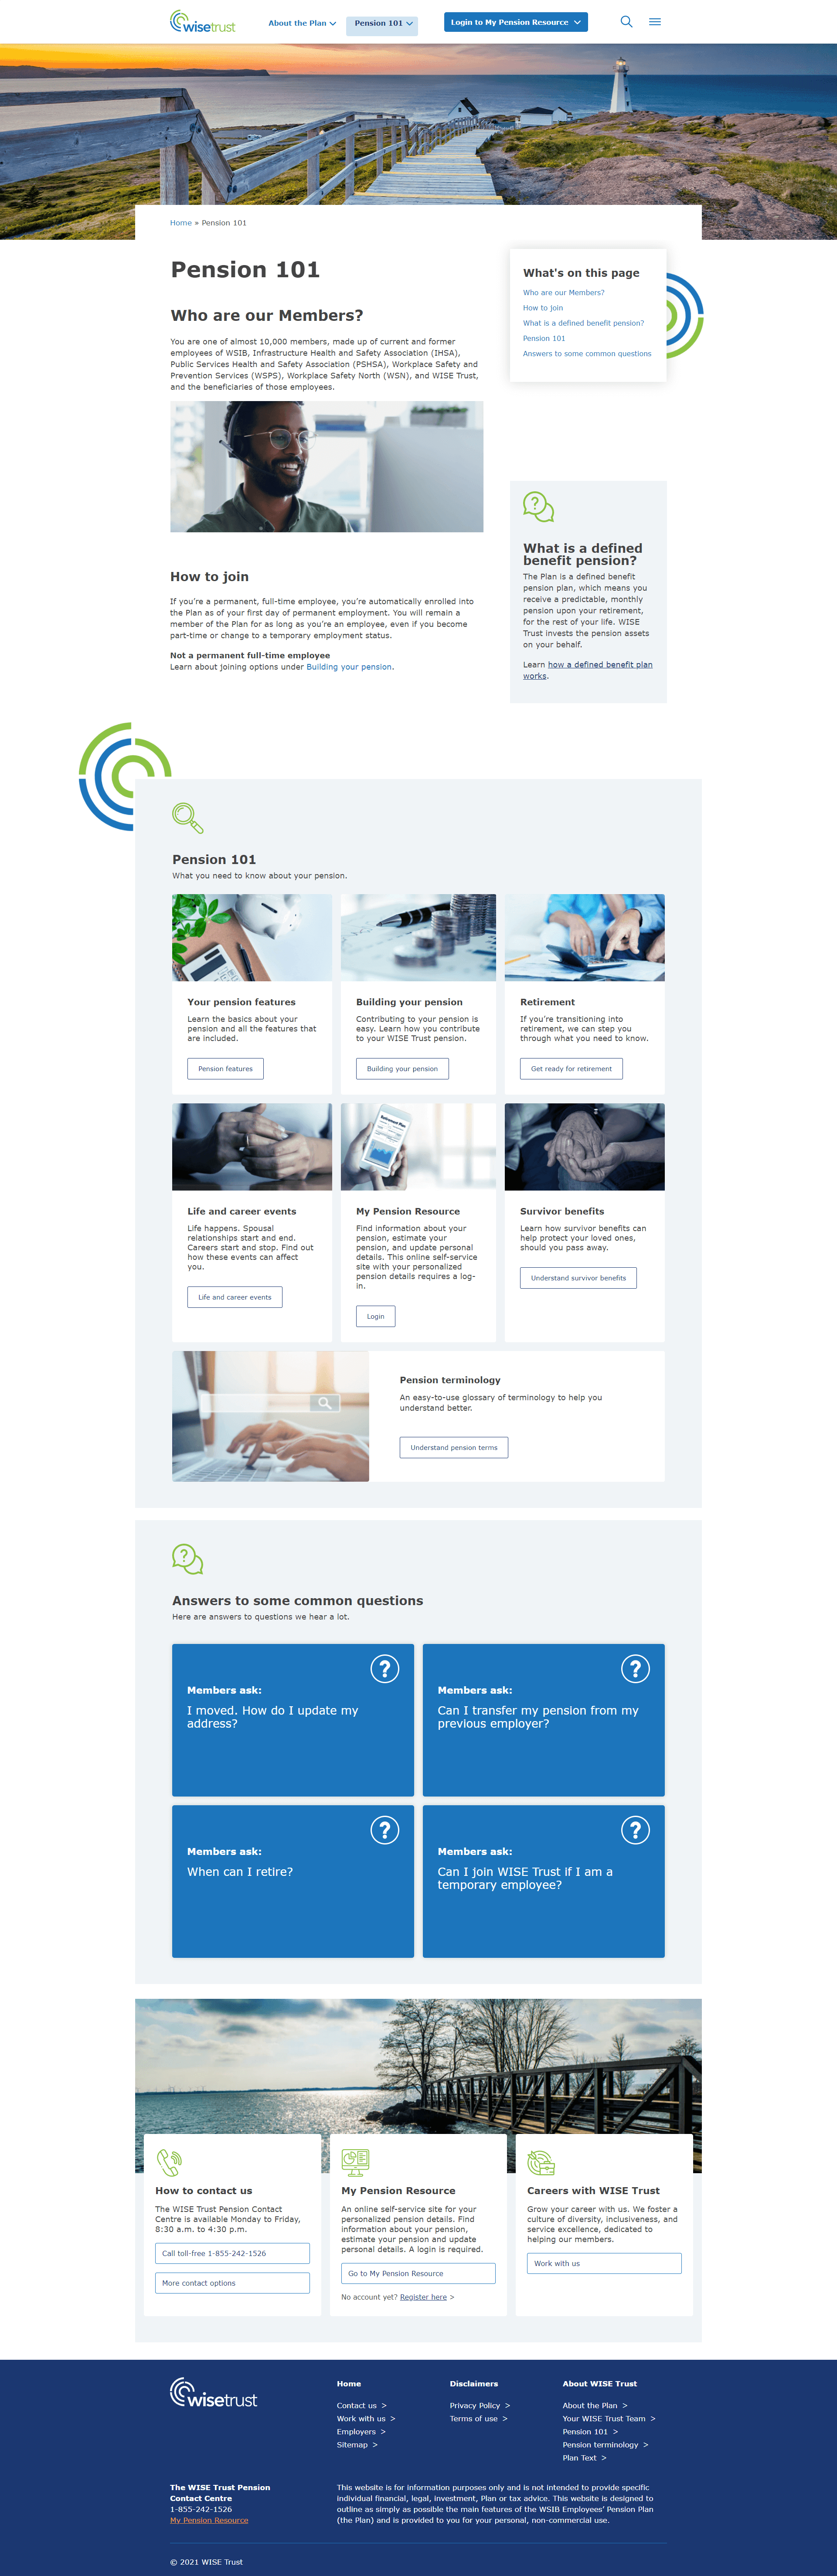 Image of WISE Trust's Pension 101 landing page for members.